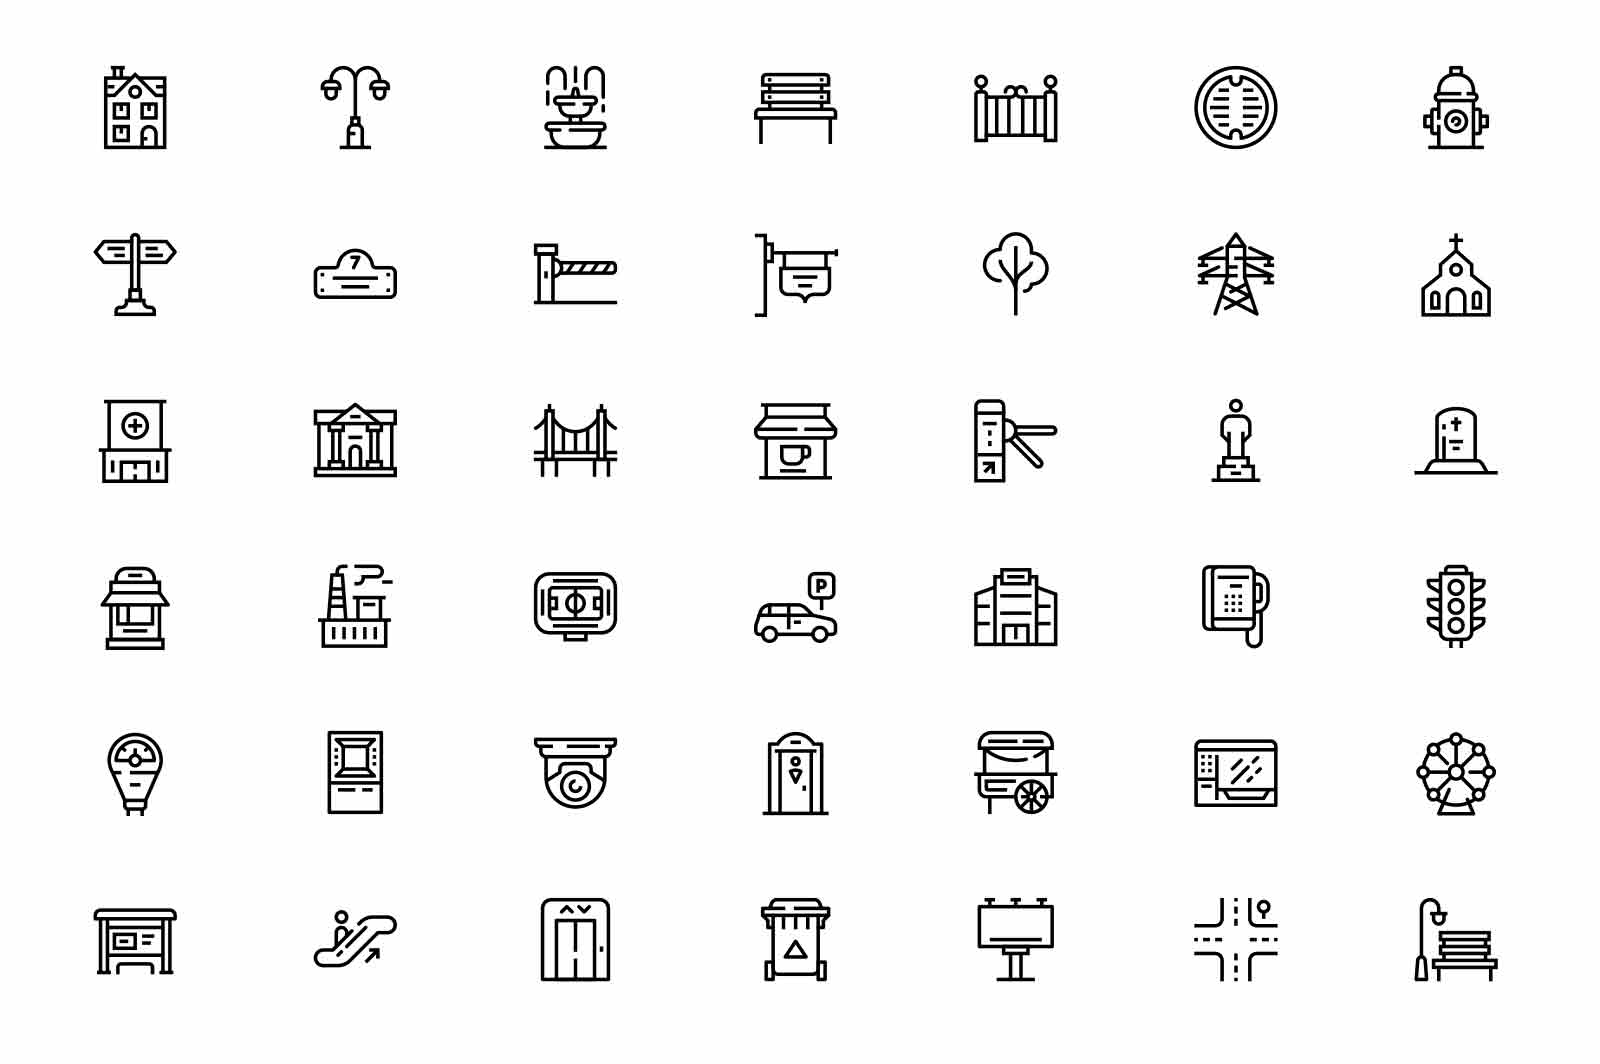 Urban city elements for design icons set vector illustration. Collection of linear icon for town decoration. Exterior and architecture concept